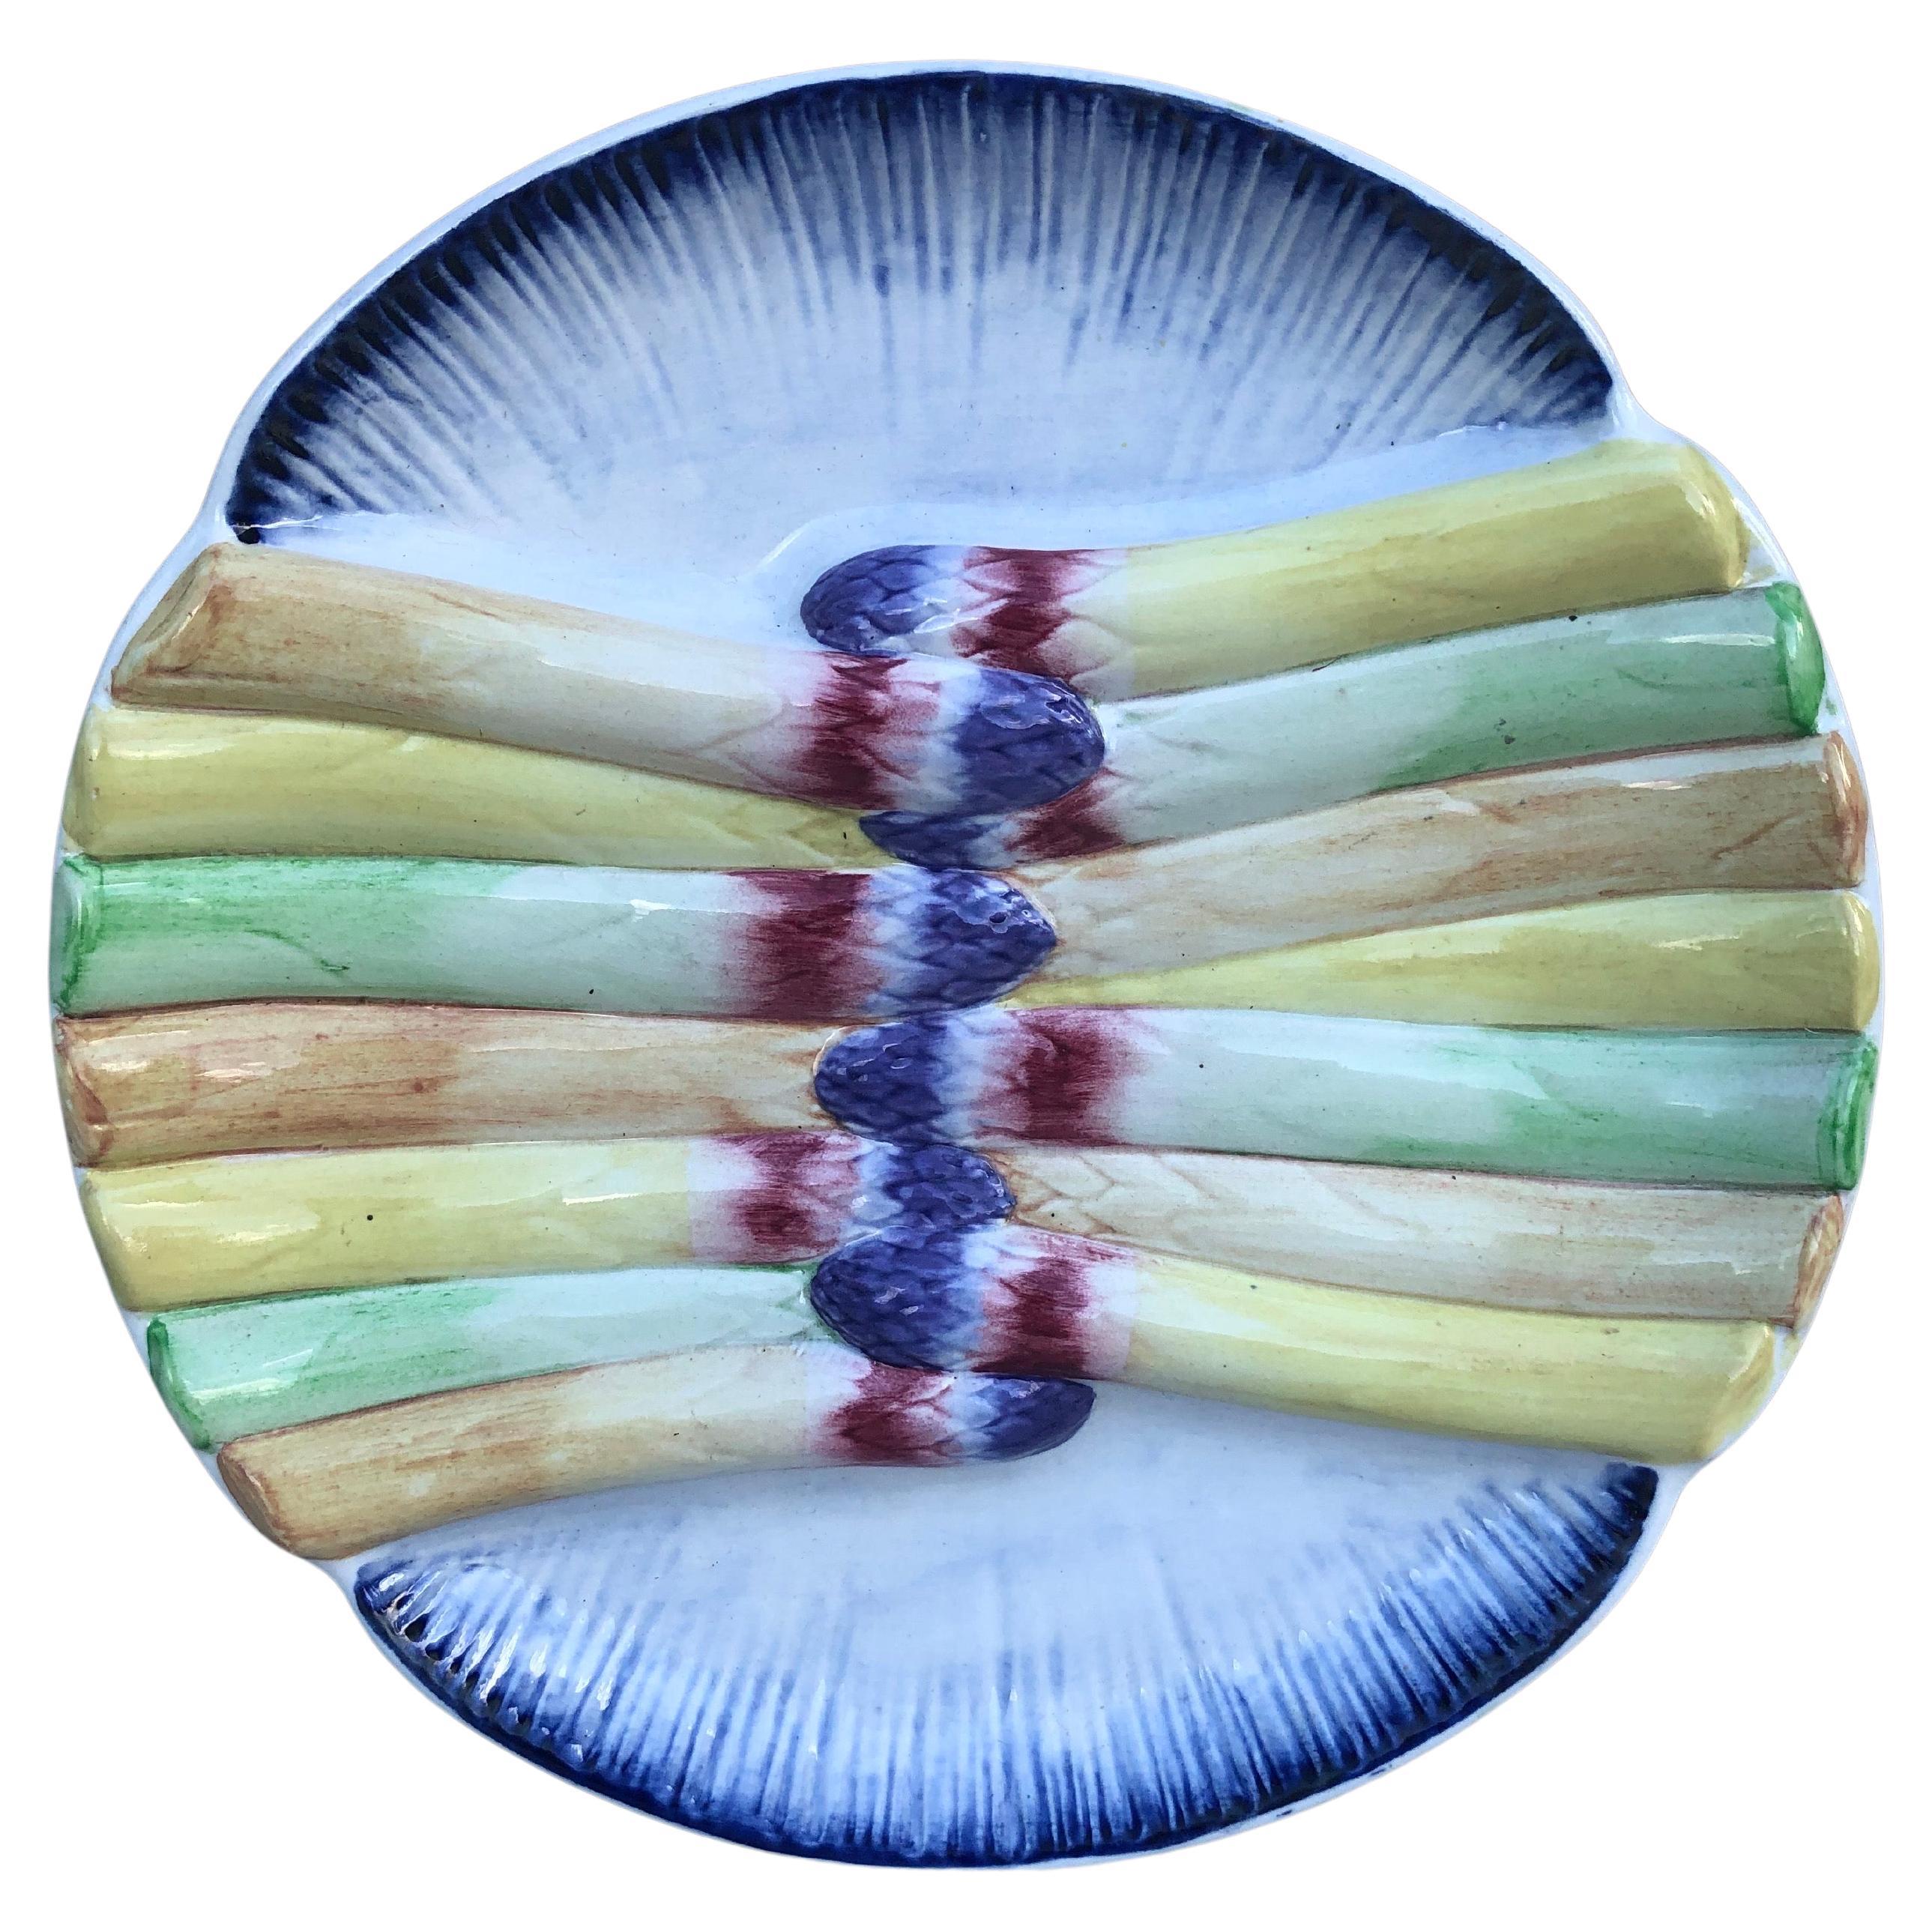 19th Century French Majolica Asparagus Plate signed Pexonne.